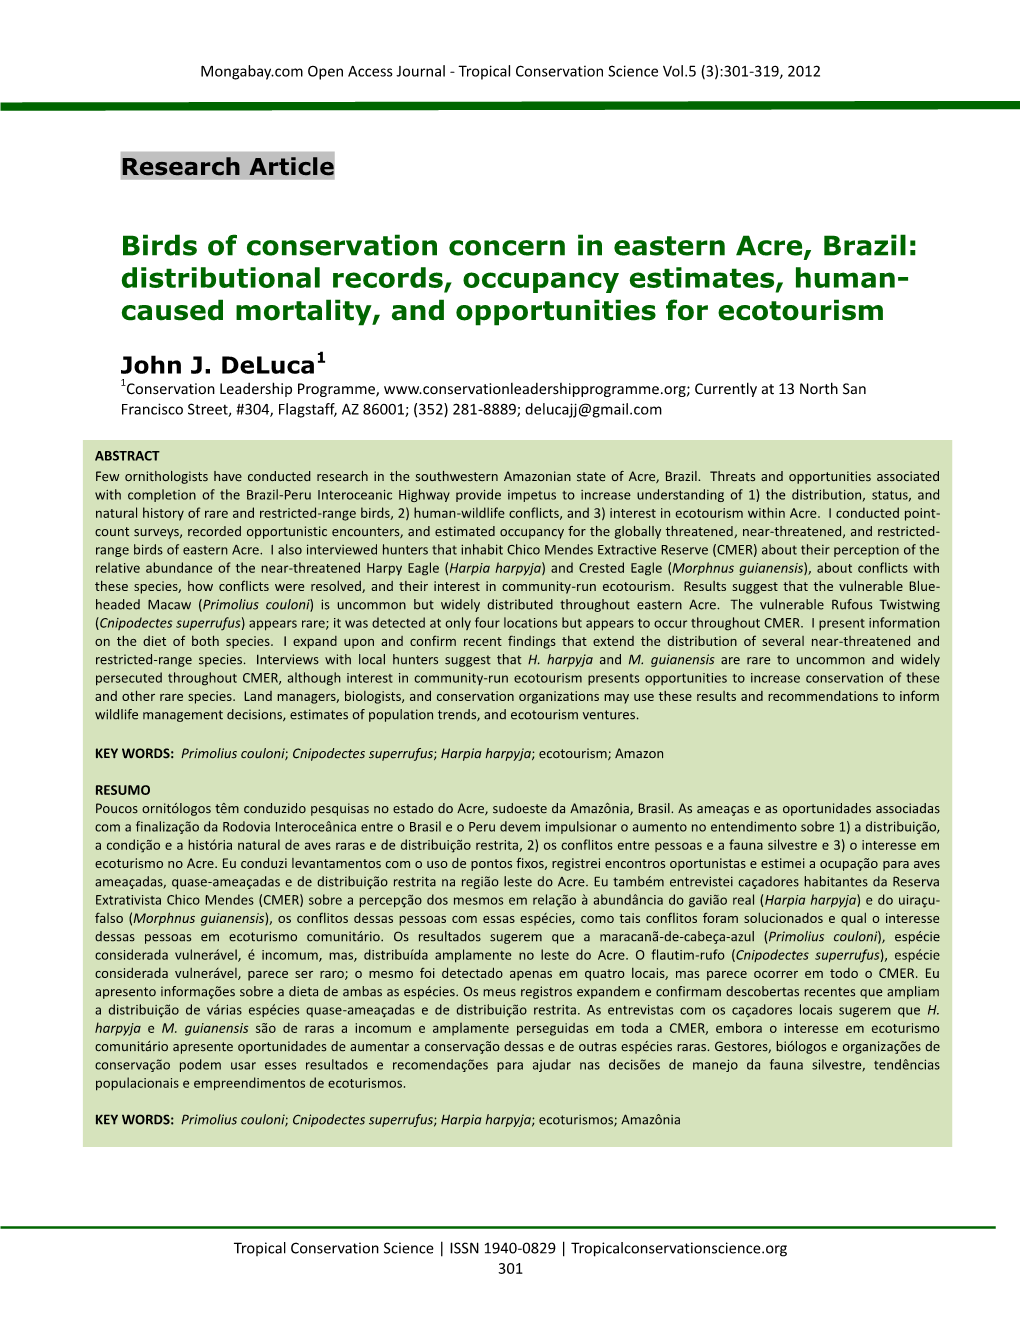 Birds of Conservation Concern in Eastern Acre, Brazil: Distributional Records, Occupancy Estimates, Human- Caused Mortality, and Opportunities for Ecotourism